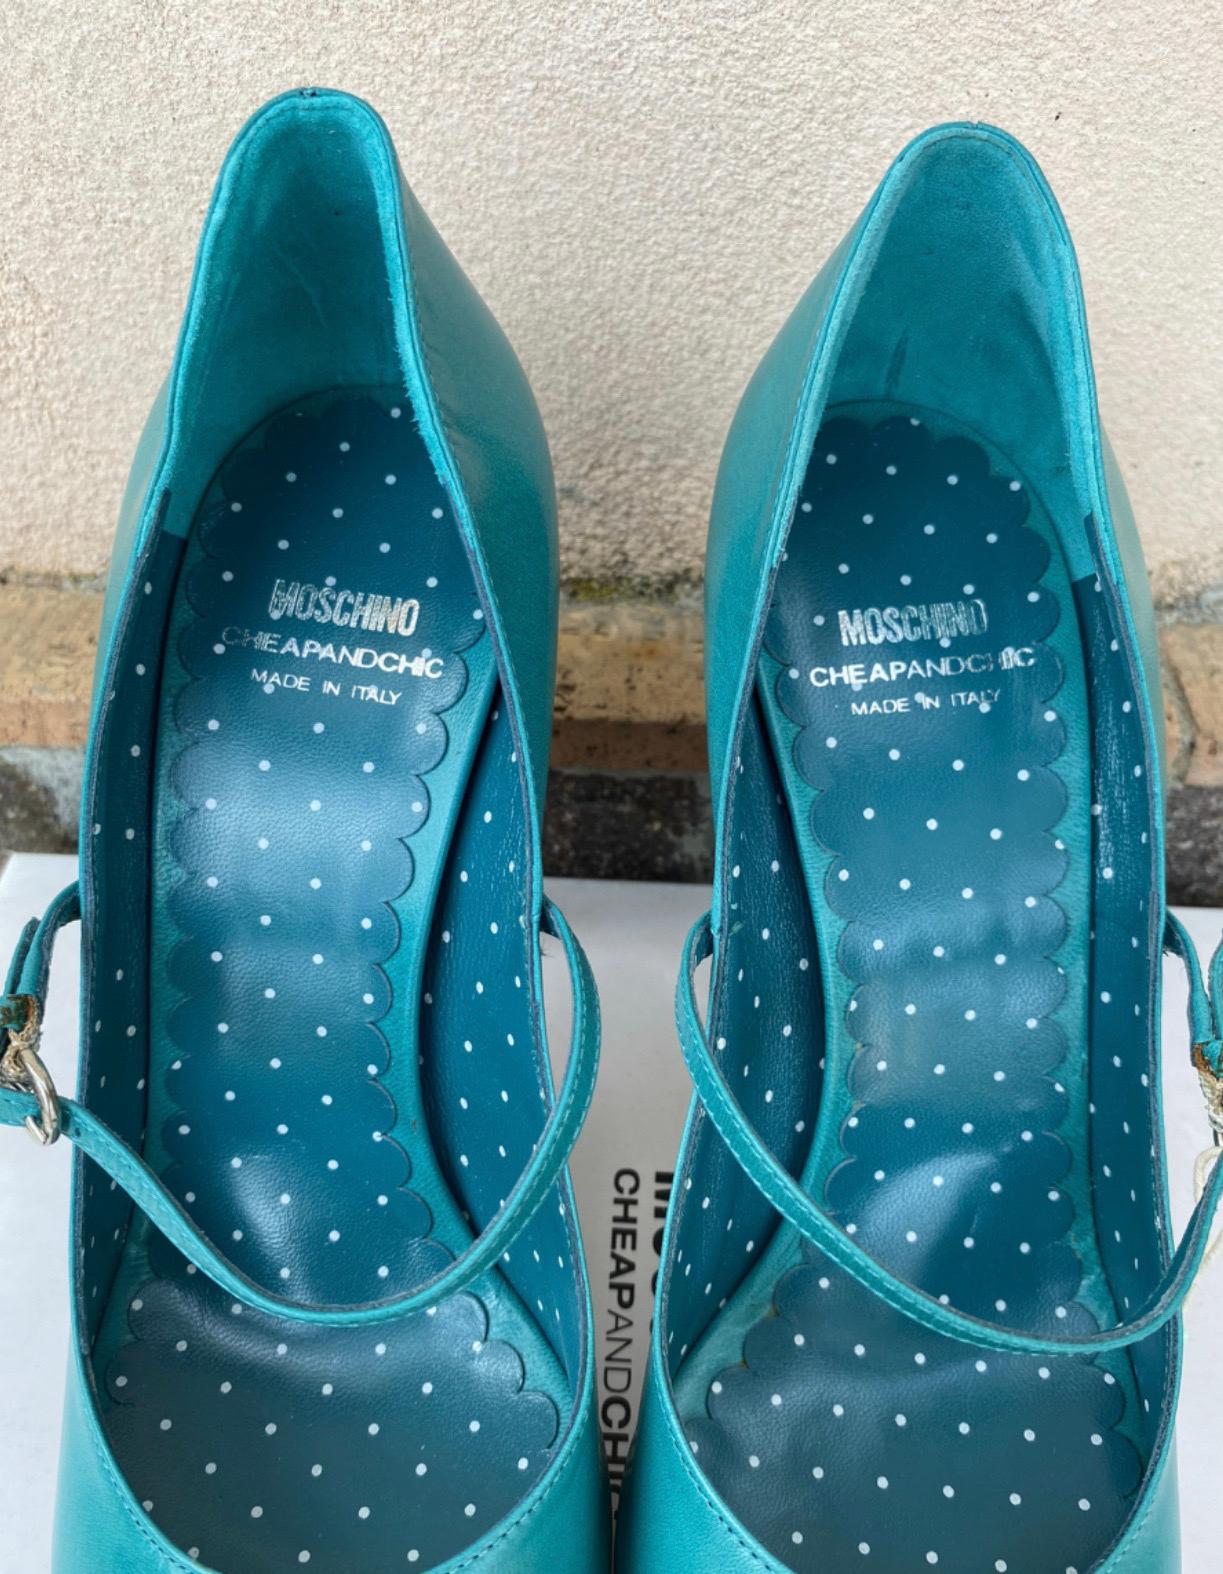 Moschino Cheap & Chic teal Open toe Shoes In Excellent Condition For Sale In Carnate, IT